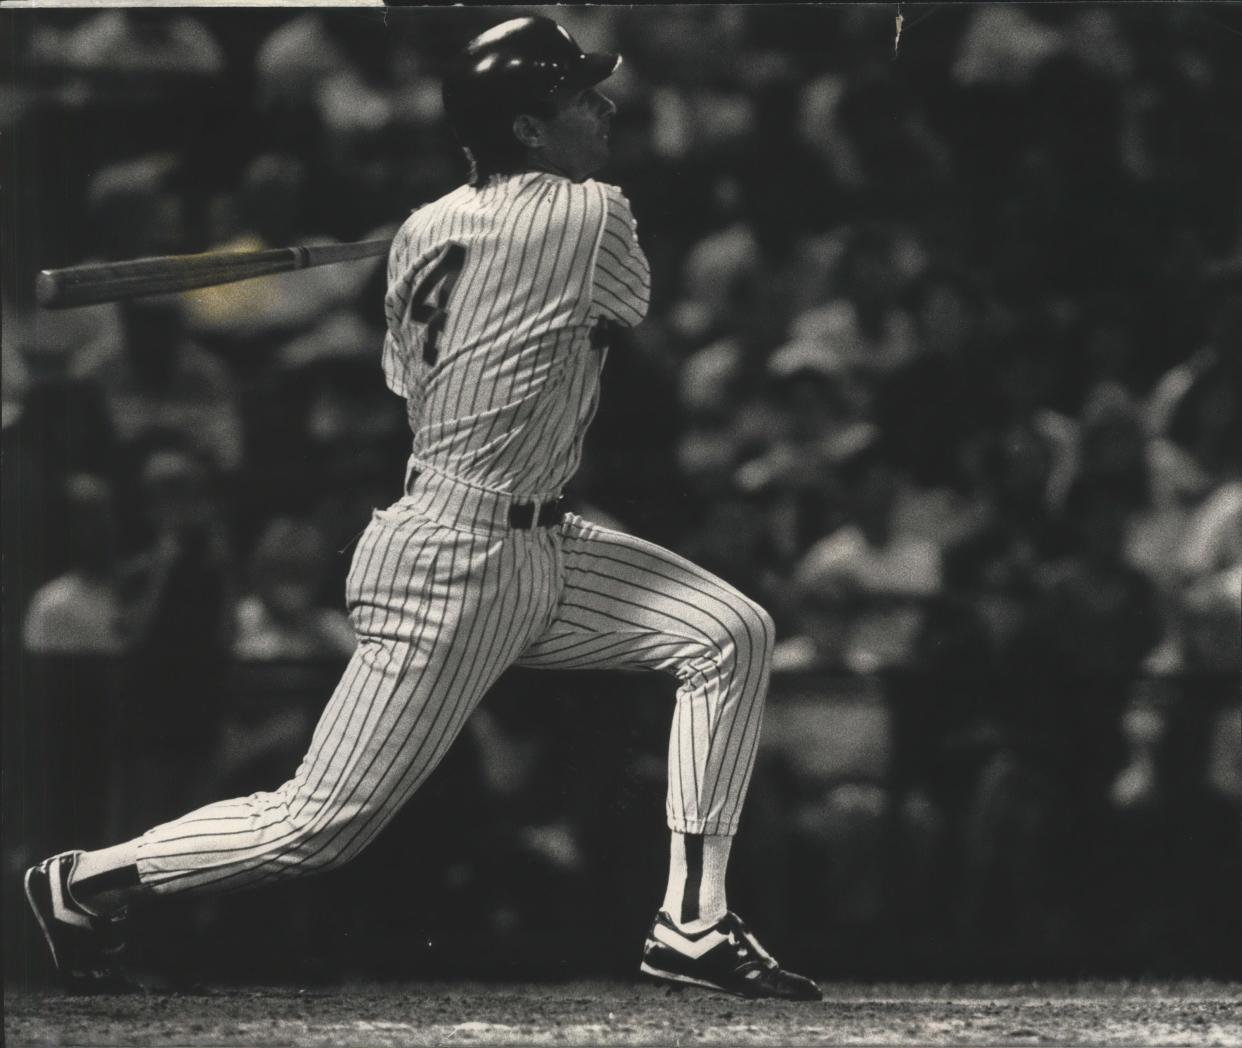 Paul Molitor takes a swing that burns Tom Henke and the Toronto Blue Jays on Aug. 13, 1991.